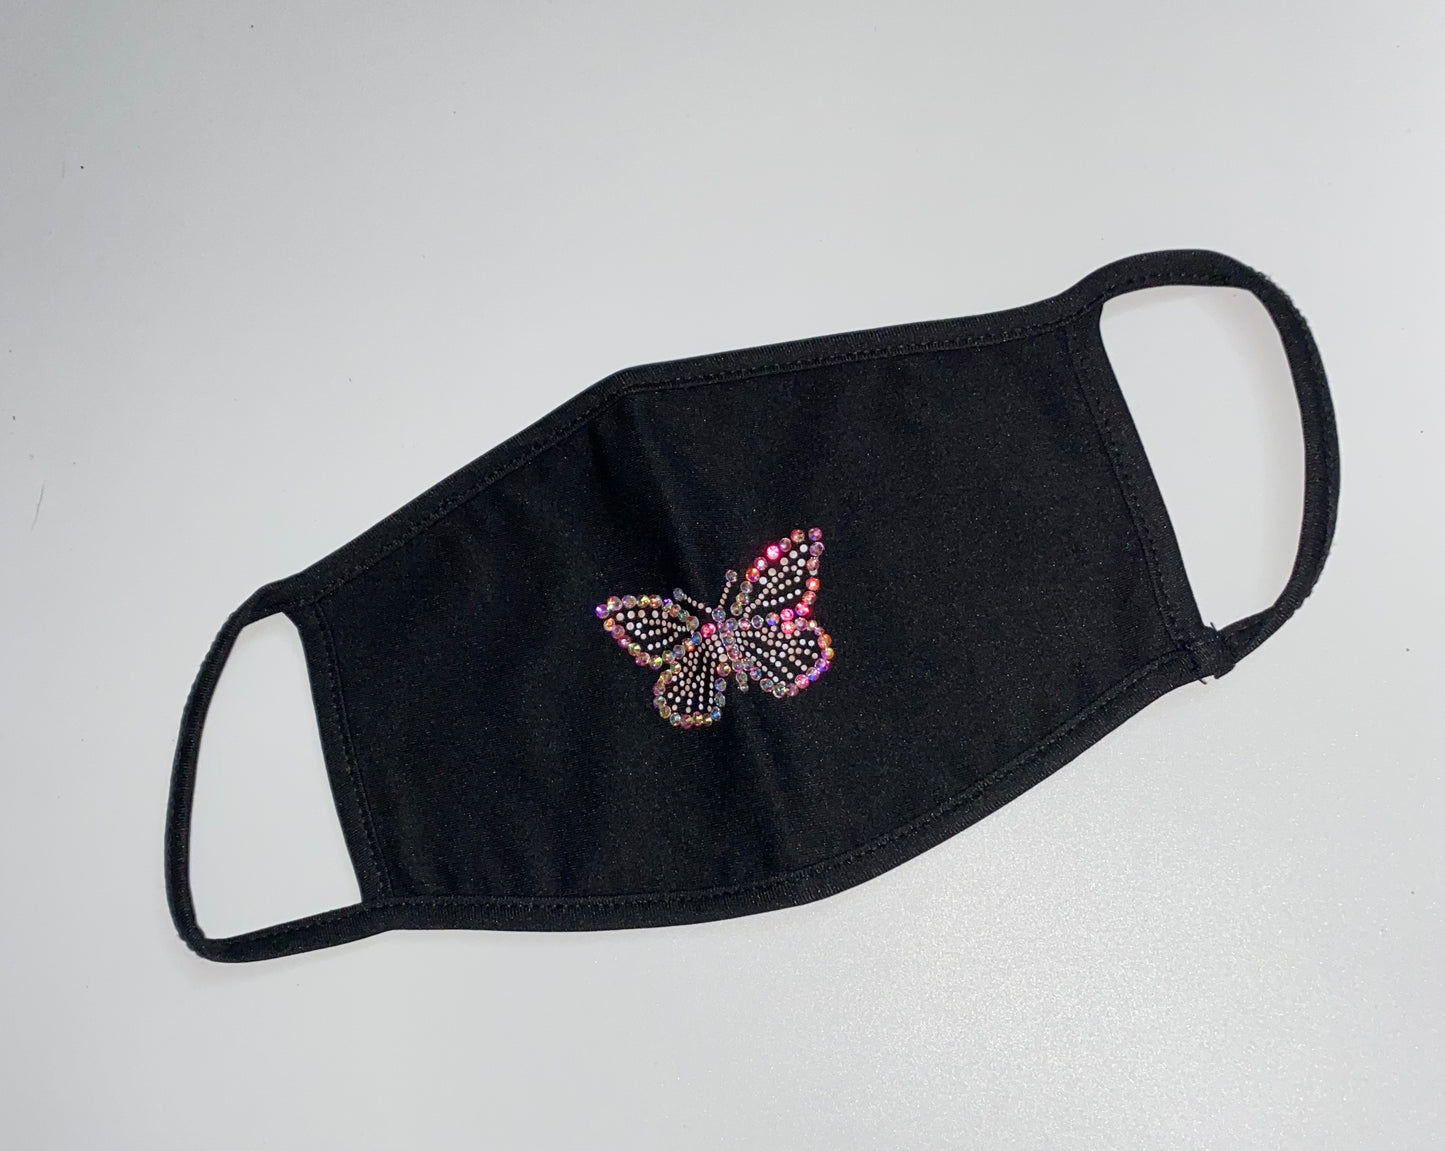 Iridescent Butterfly Glam Swarovski Crystal Face Mask In Black